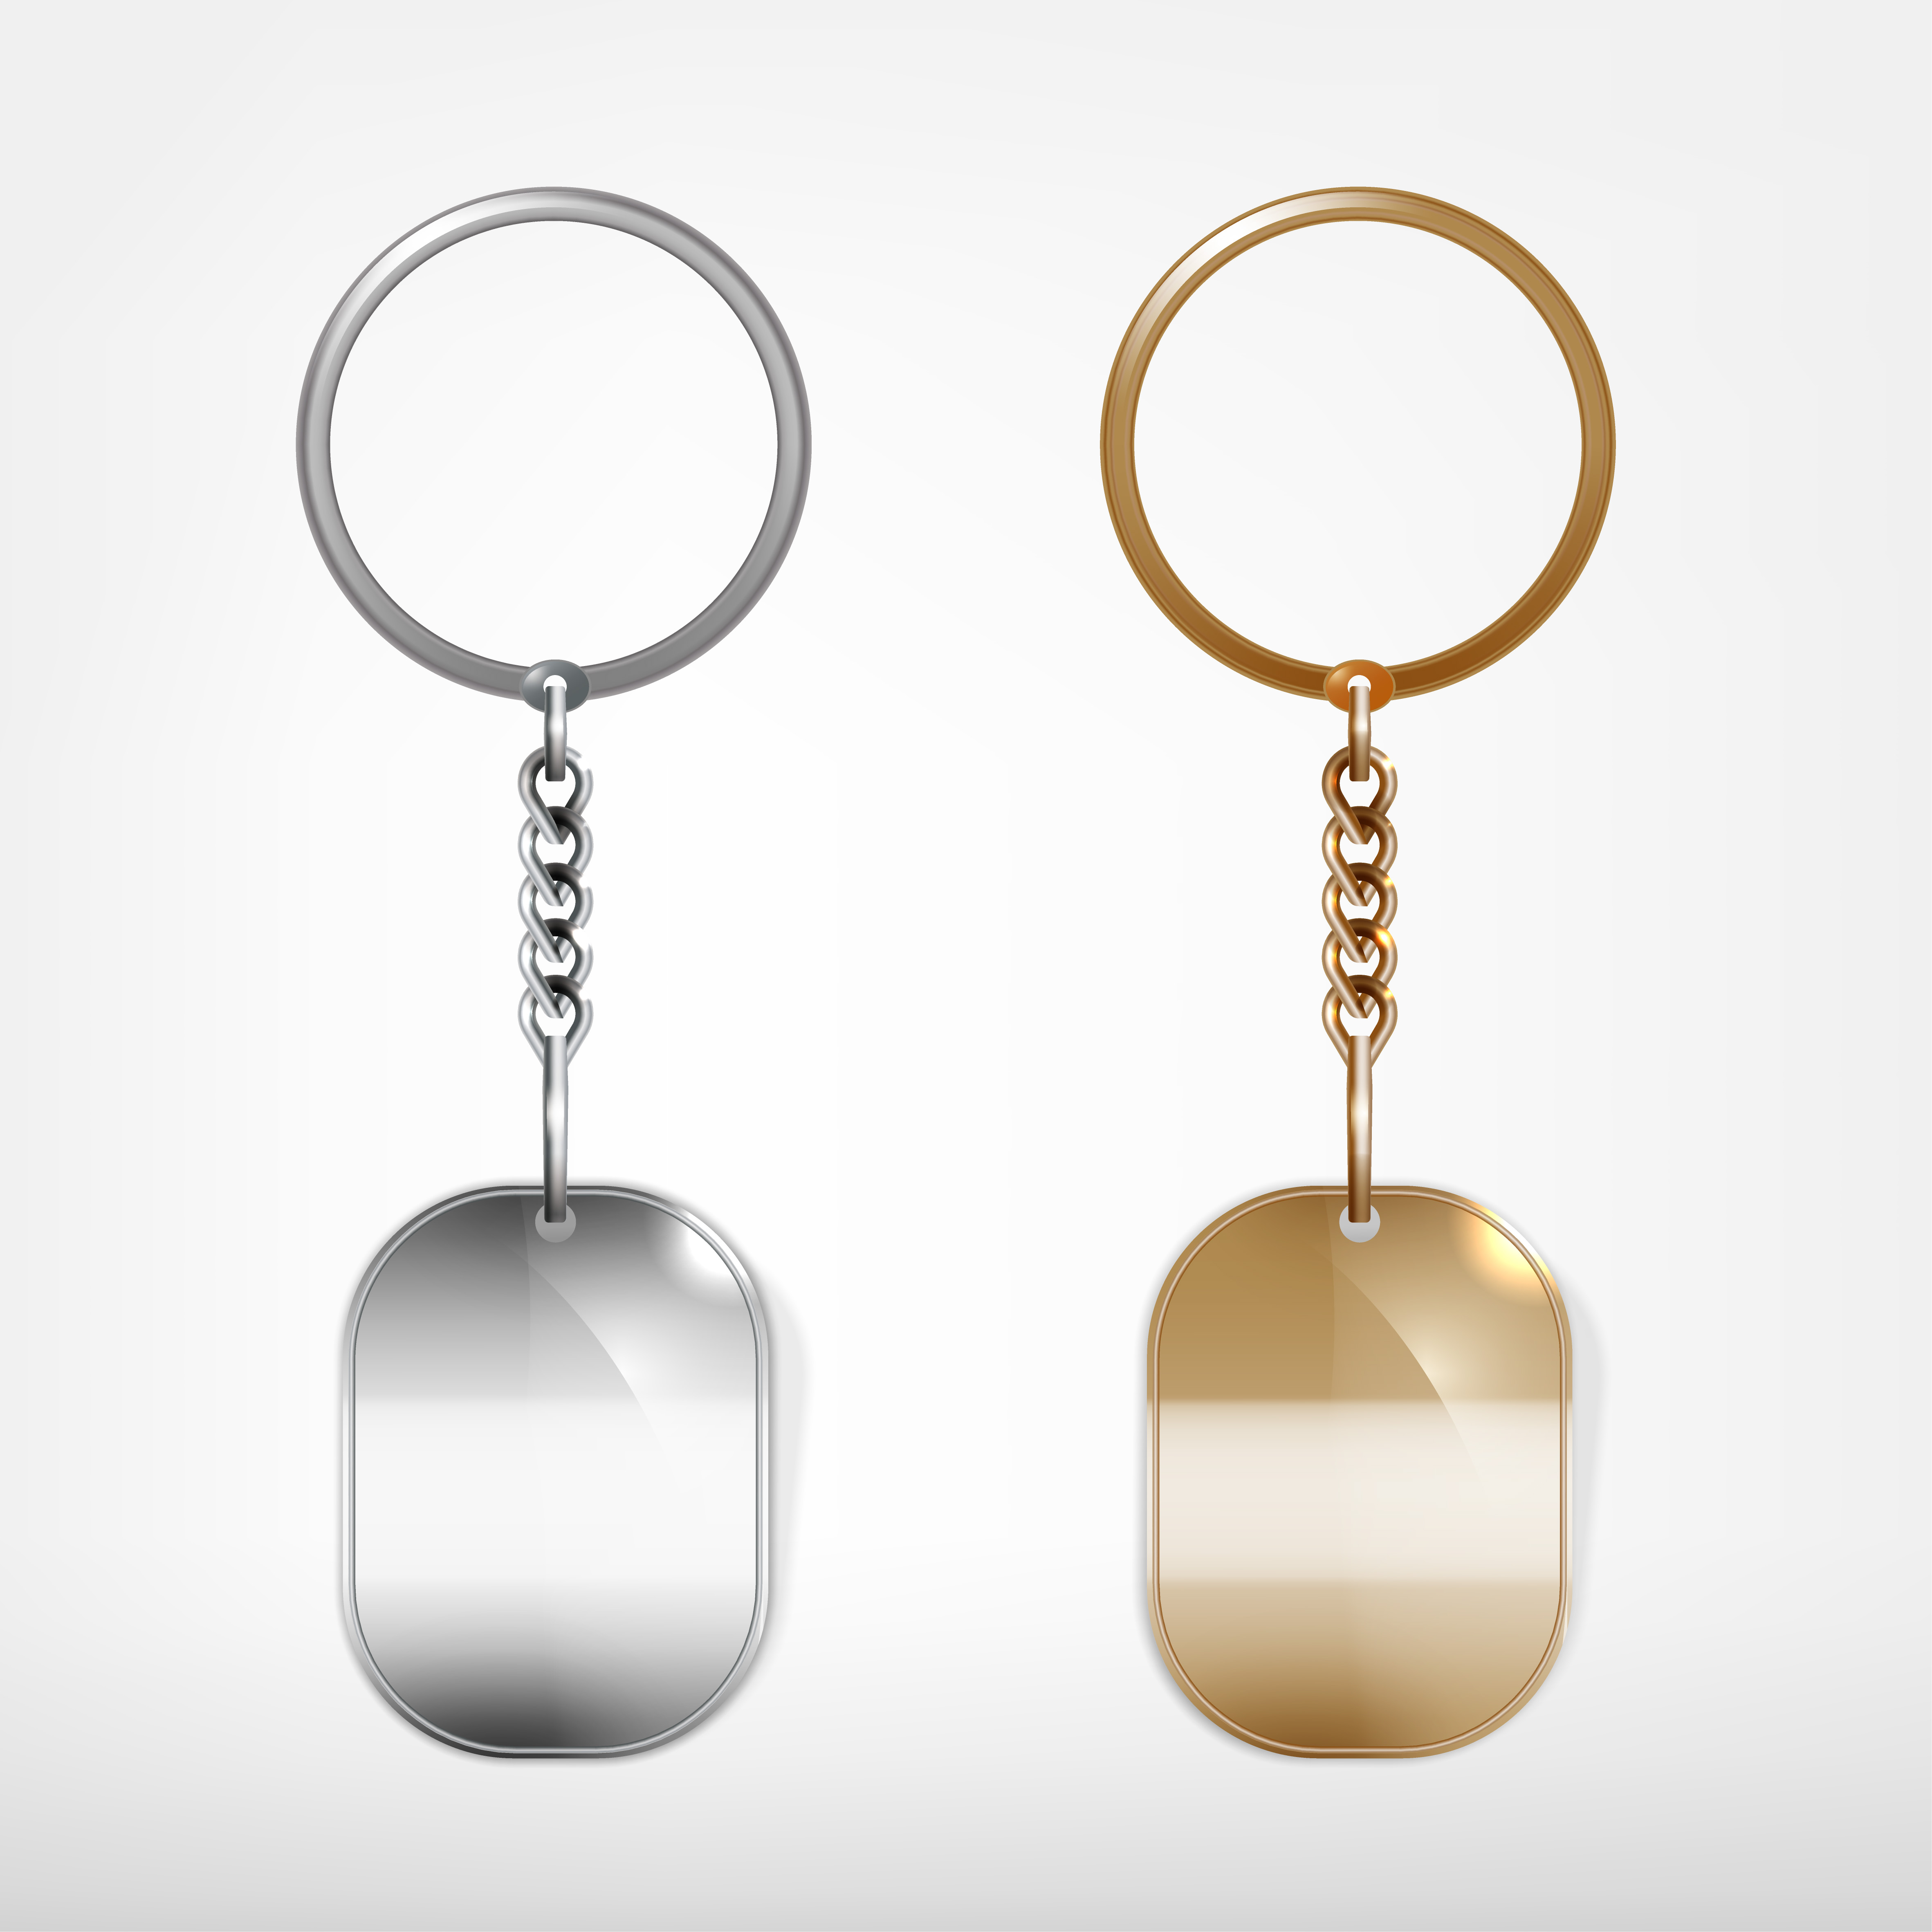 Shining keychain template vectors 04 free download